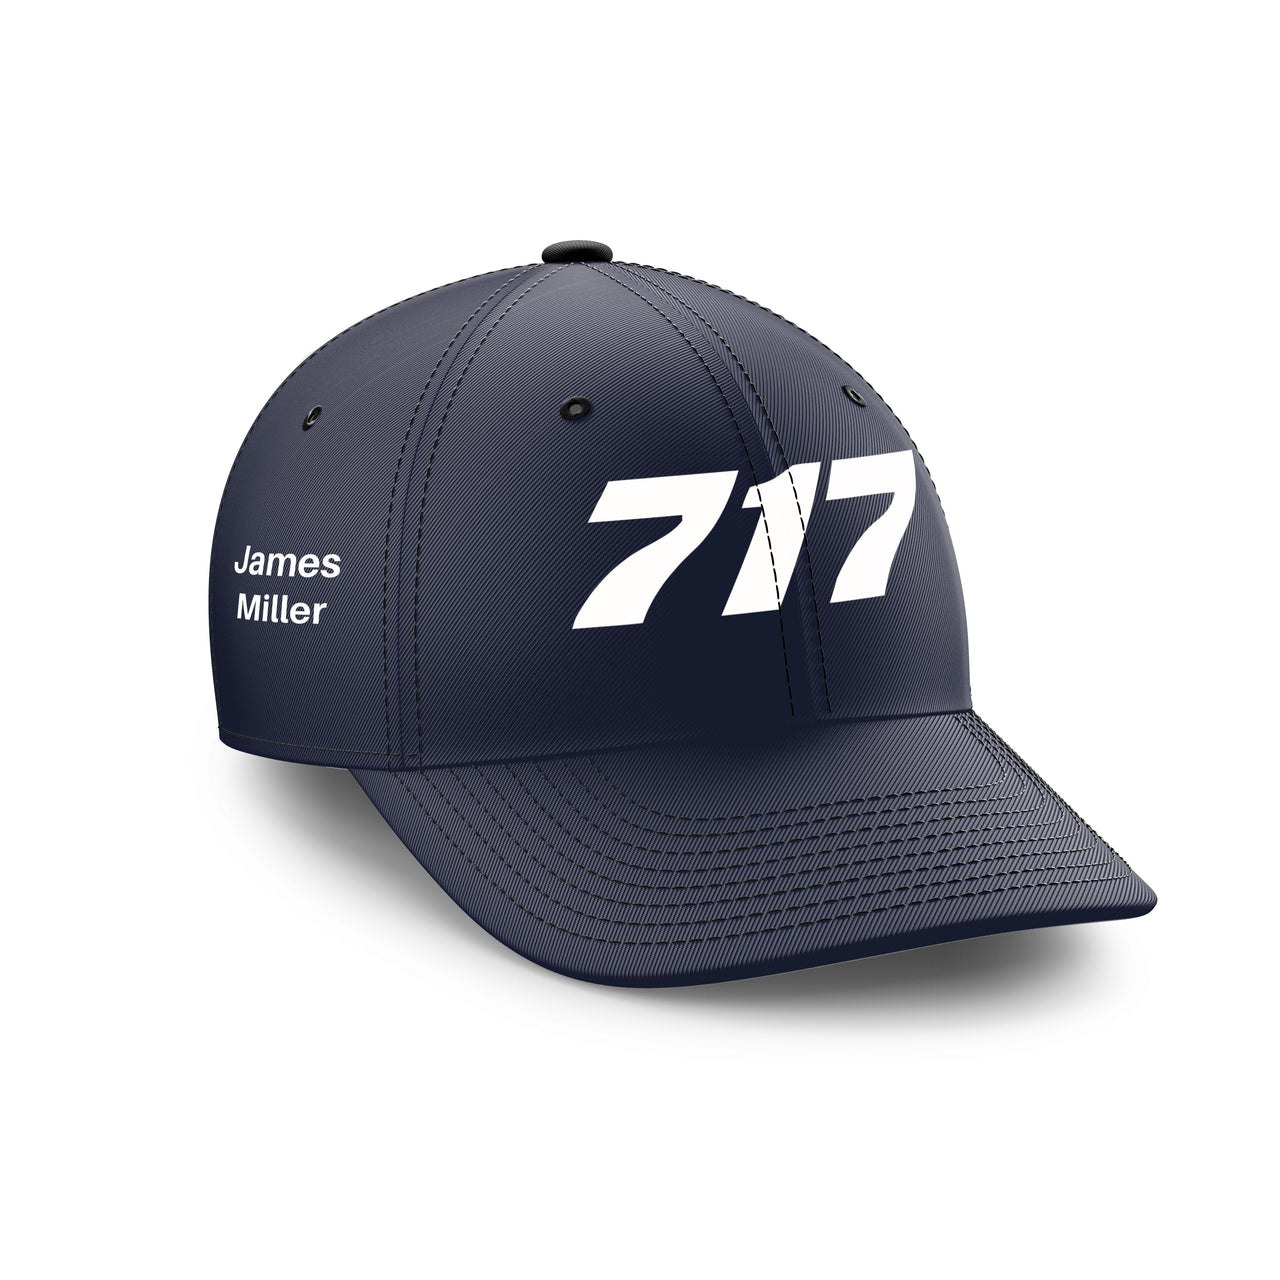 Customizable Name & 717 Flat Text Embroidered Hats